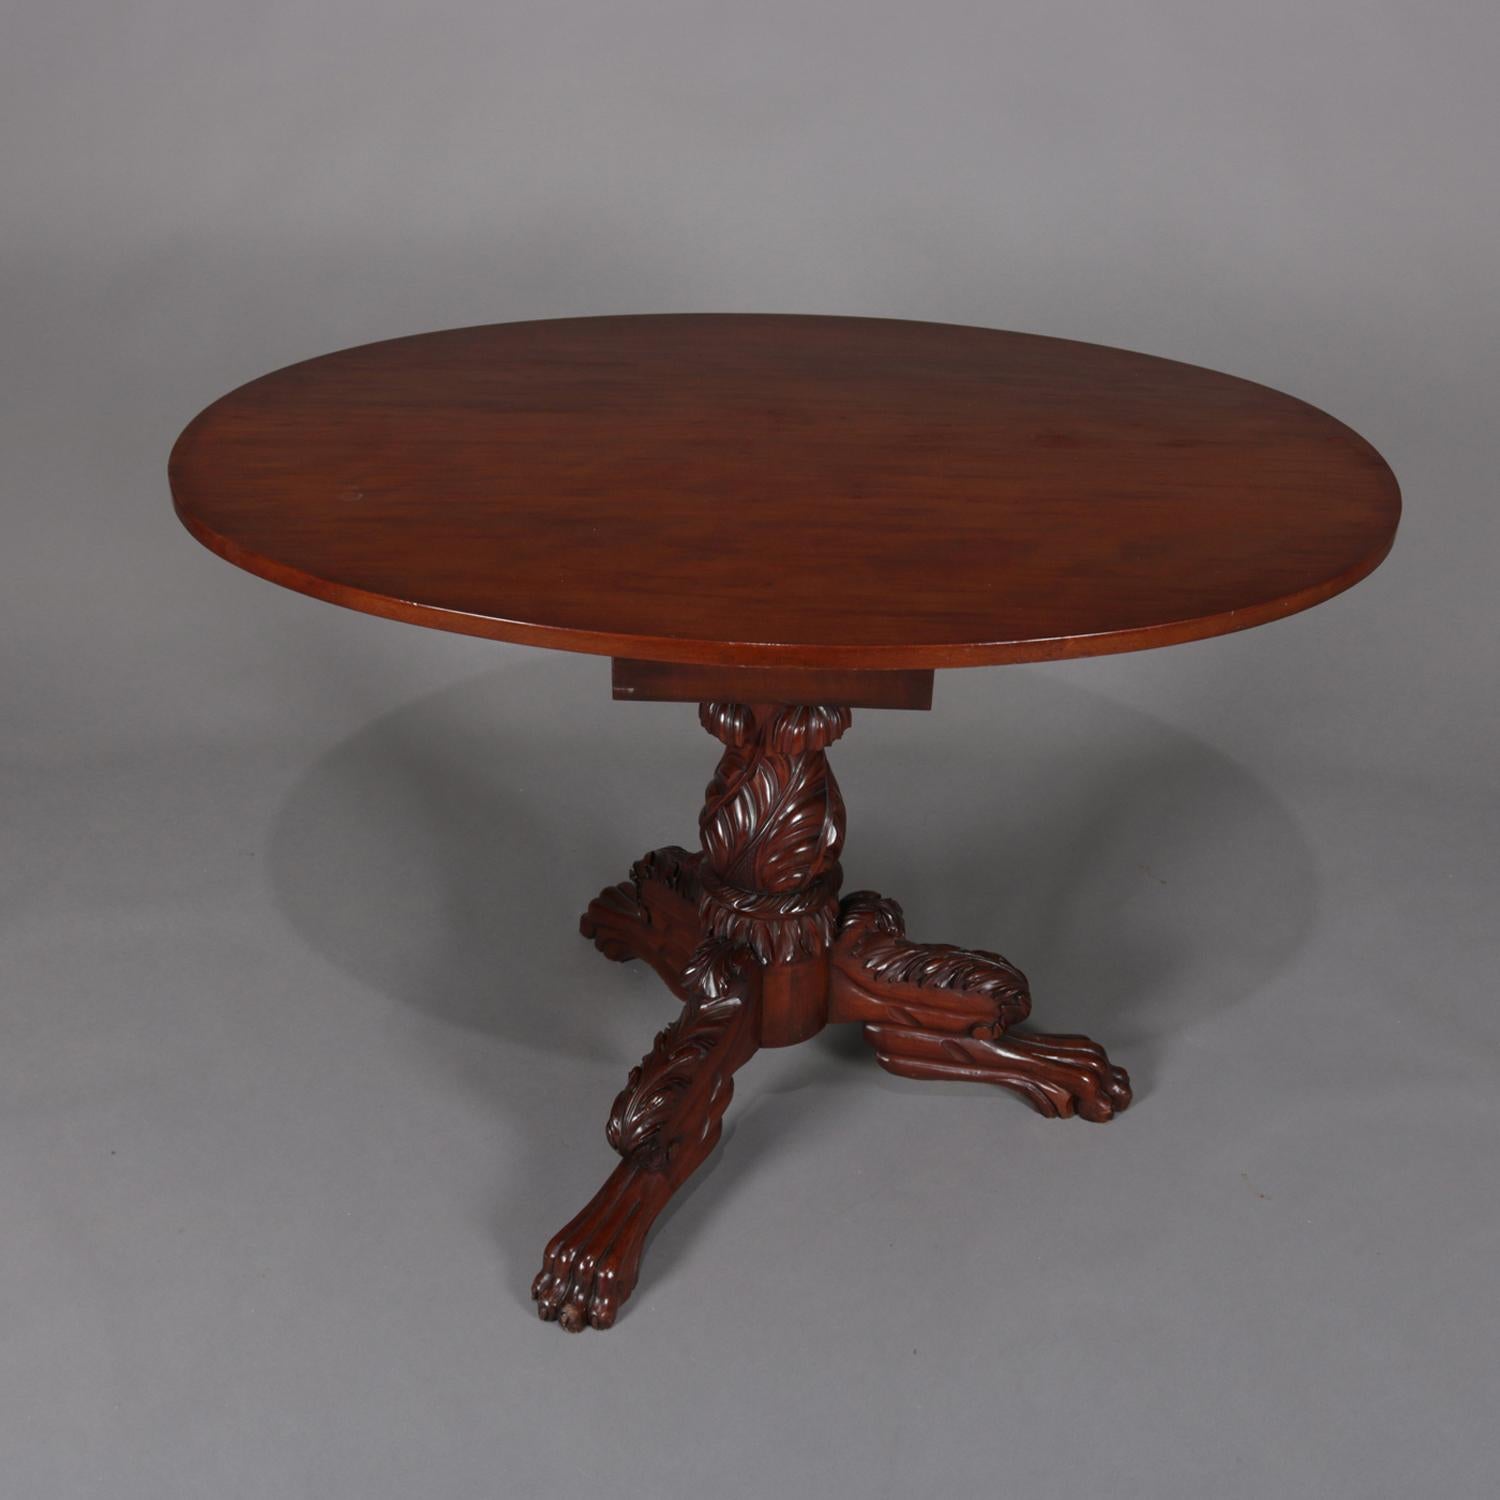 American Empire tilt-top table features mahogany construction with oval tilt top over bird cage and latch system supported by carved acanthus plinth with three intricately carved legs with paw feet, circa 1840

Measures: 54.5